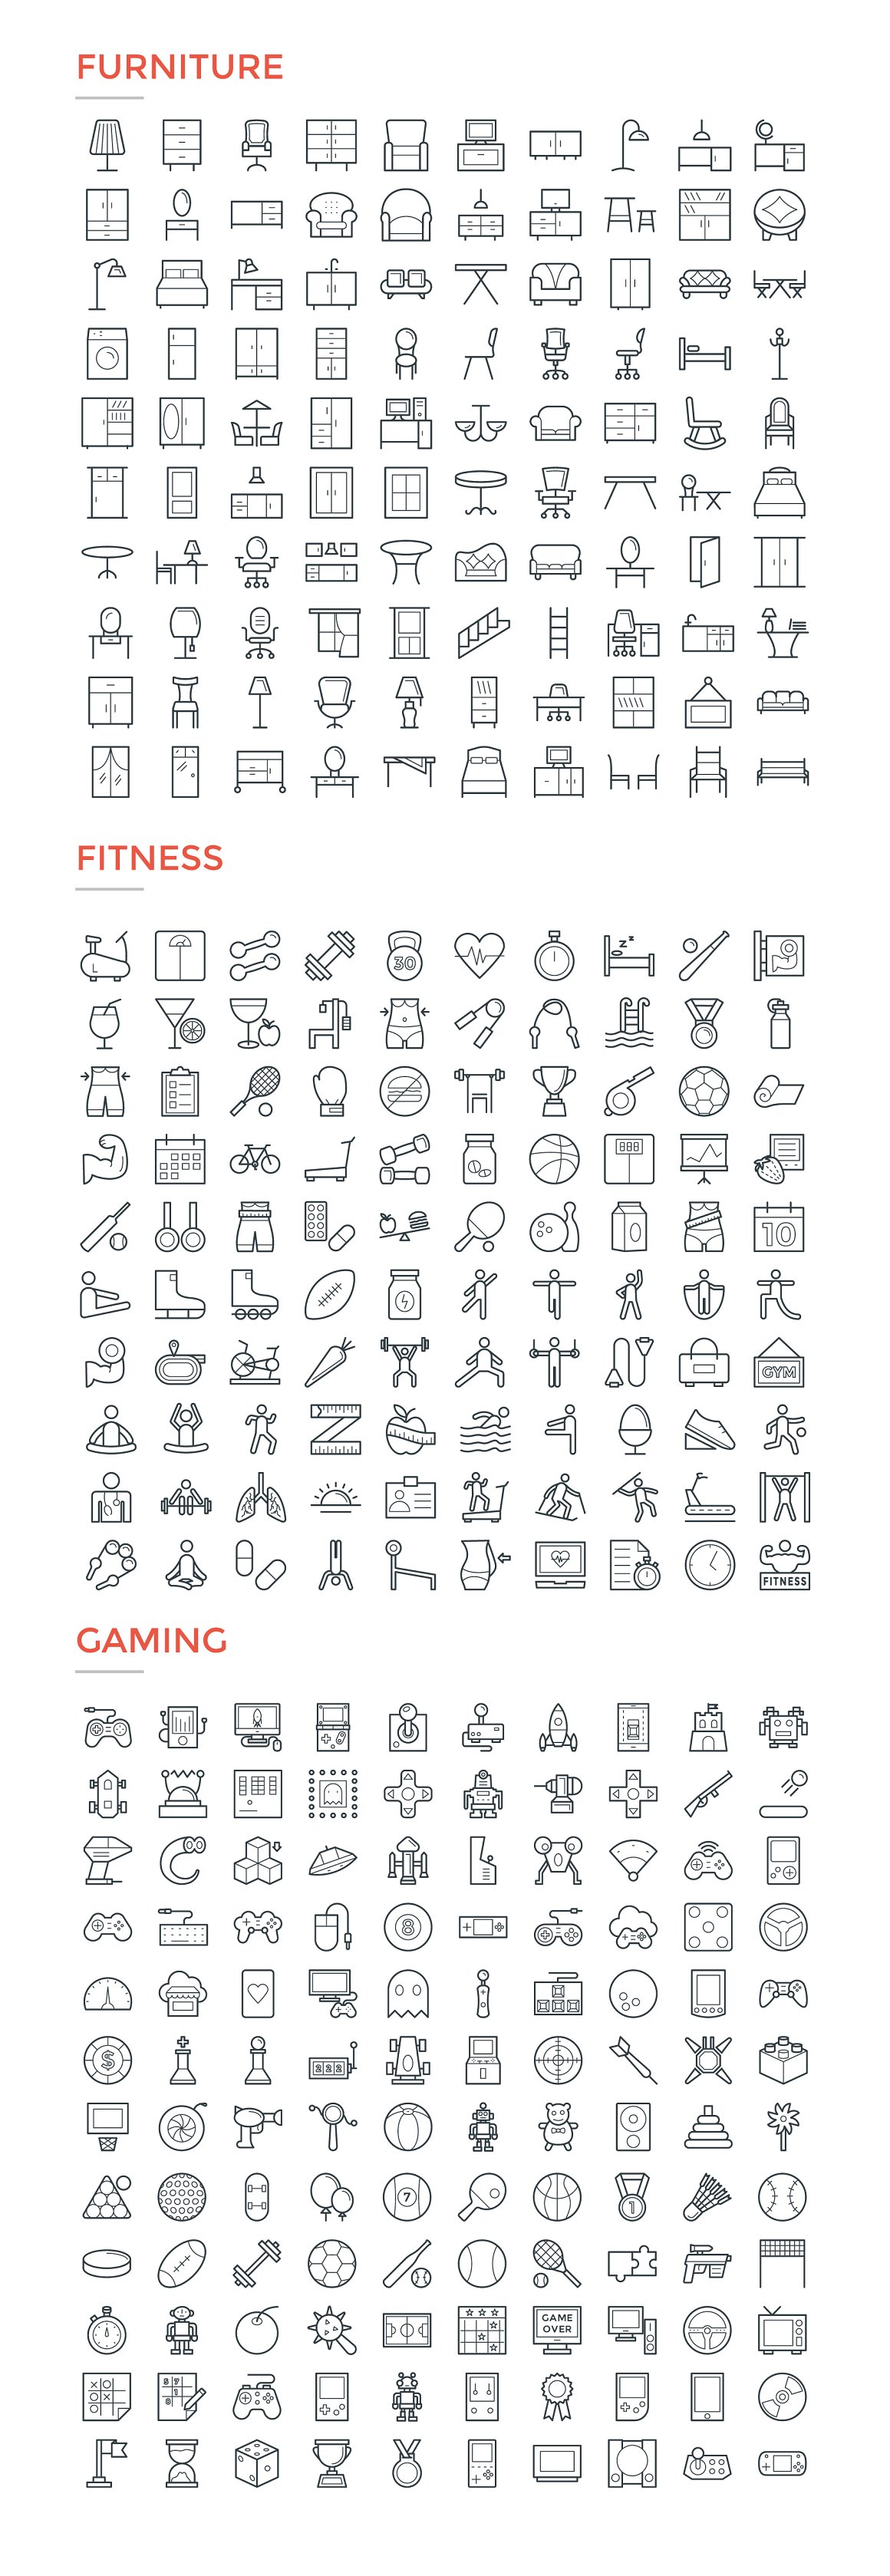 A set of furniture, fitness and gaming icons on a white background.